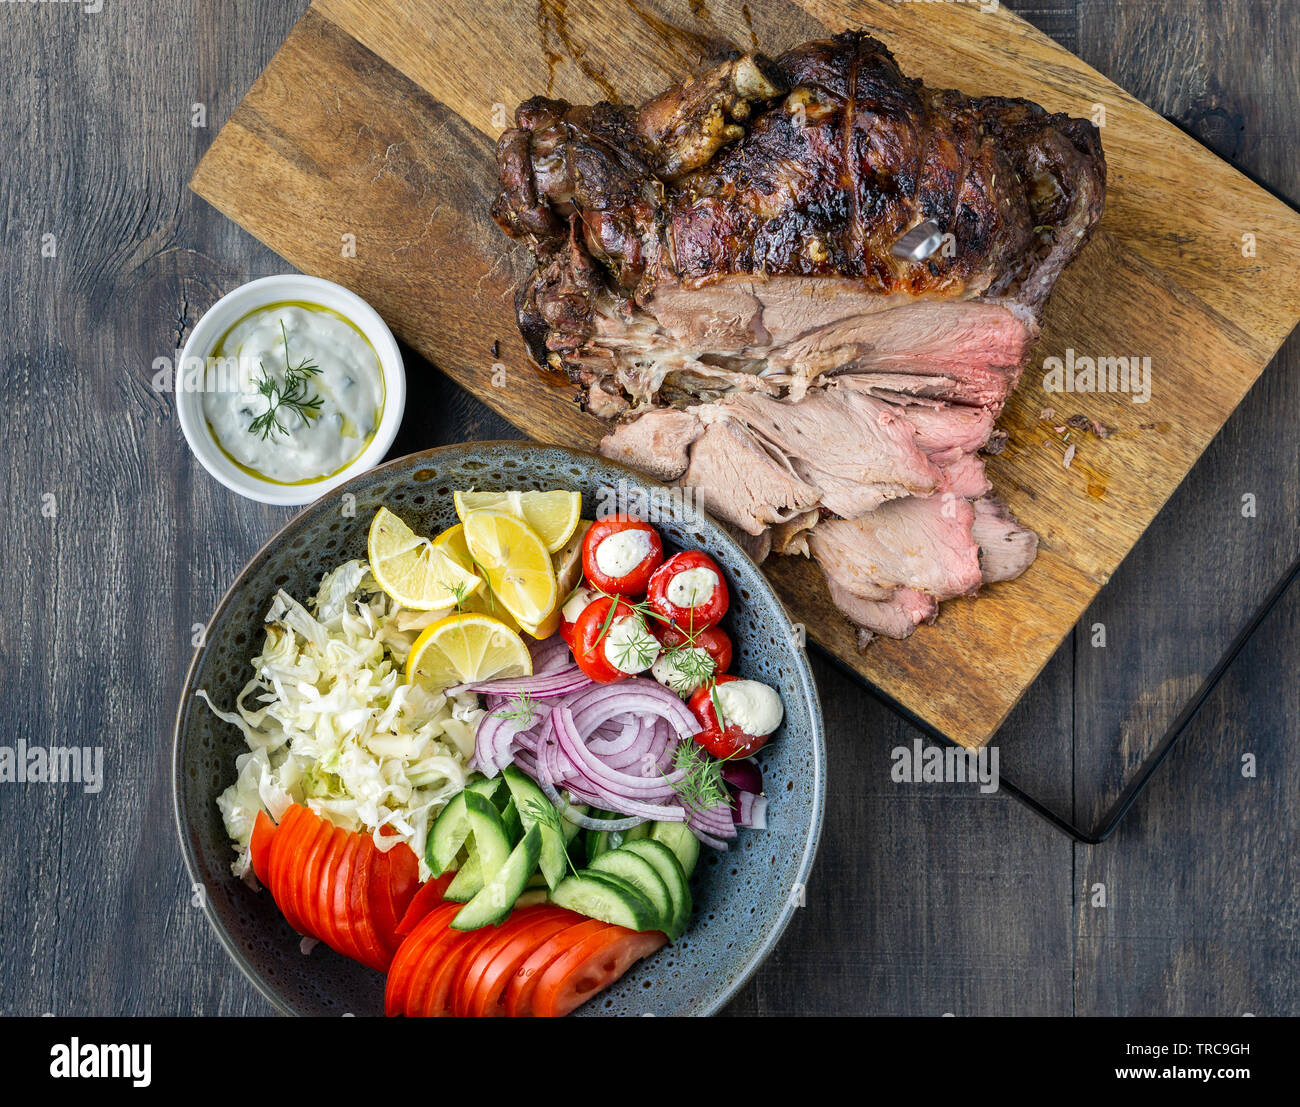 Delicious Lamb leg roast cooked on a rotisserie served with fresh greek salad and sauce for souvlaki wraps. Stock Photo